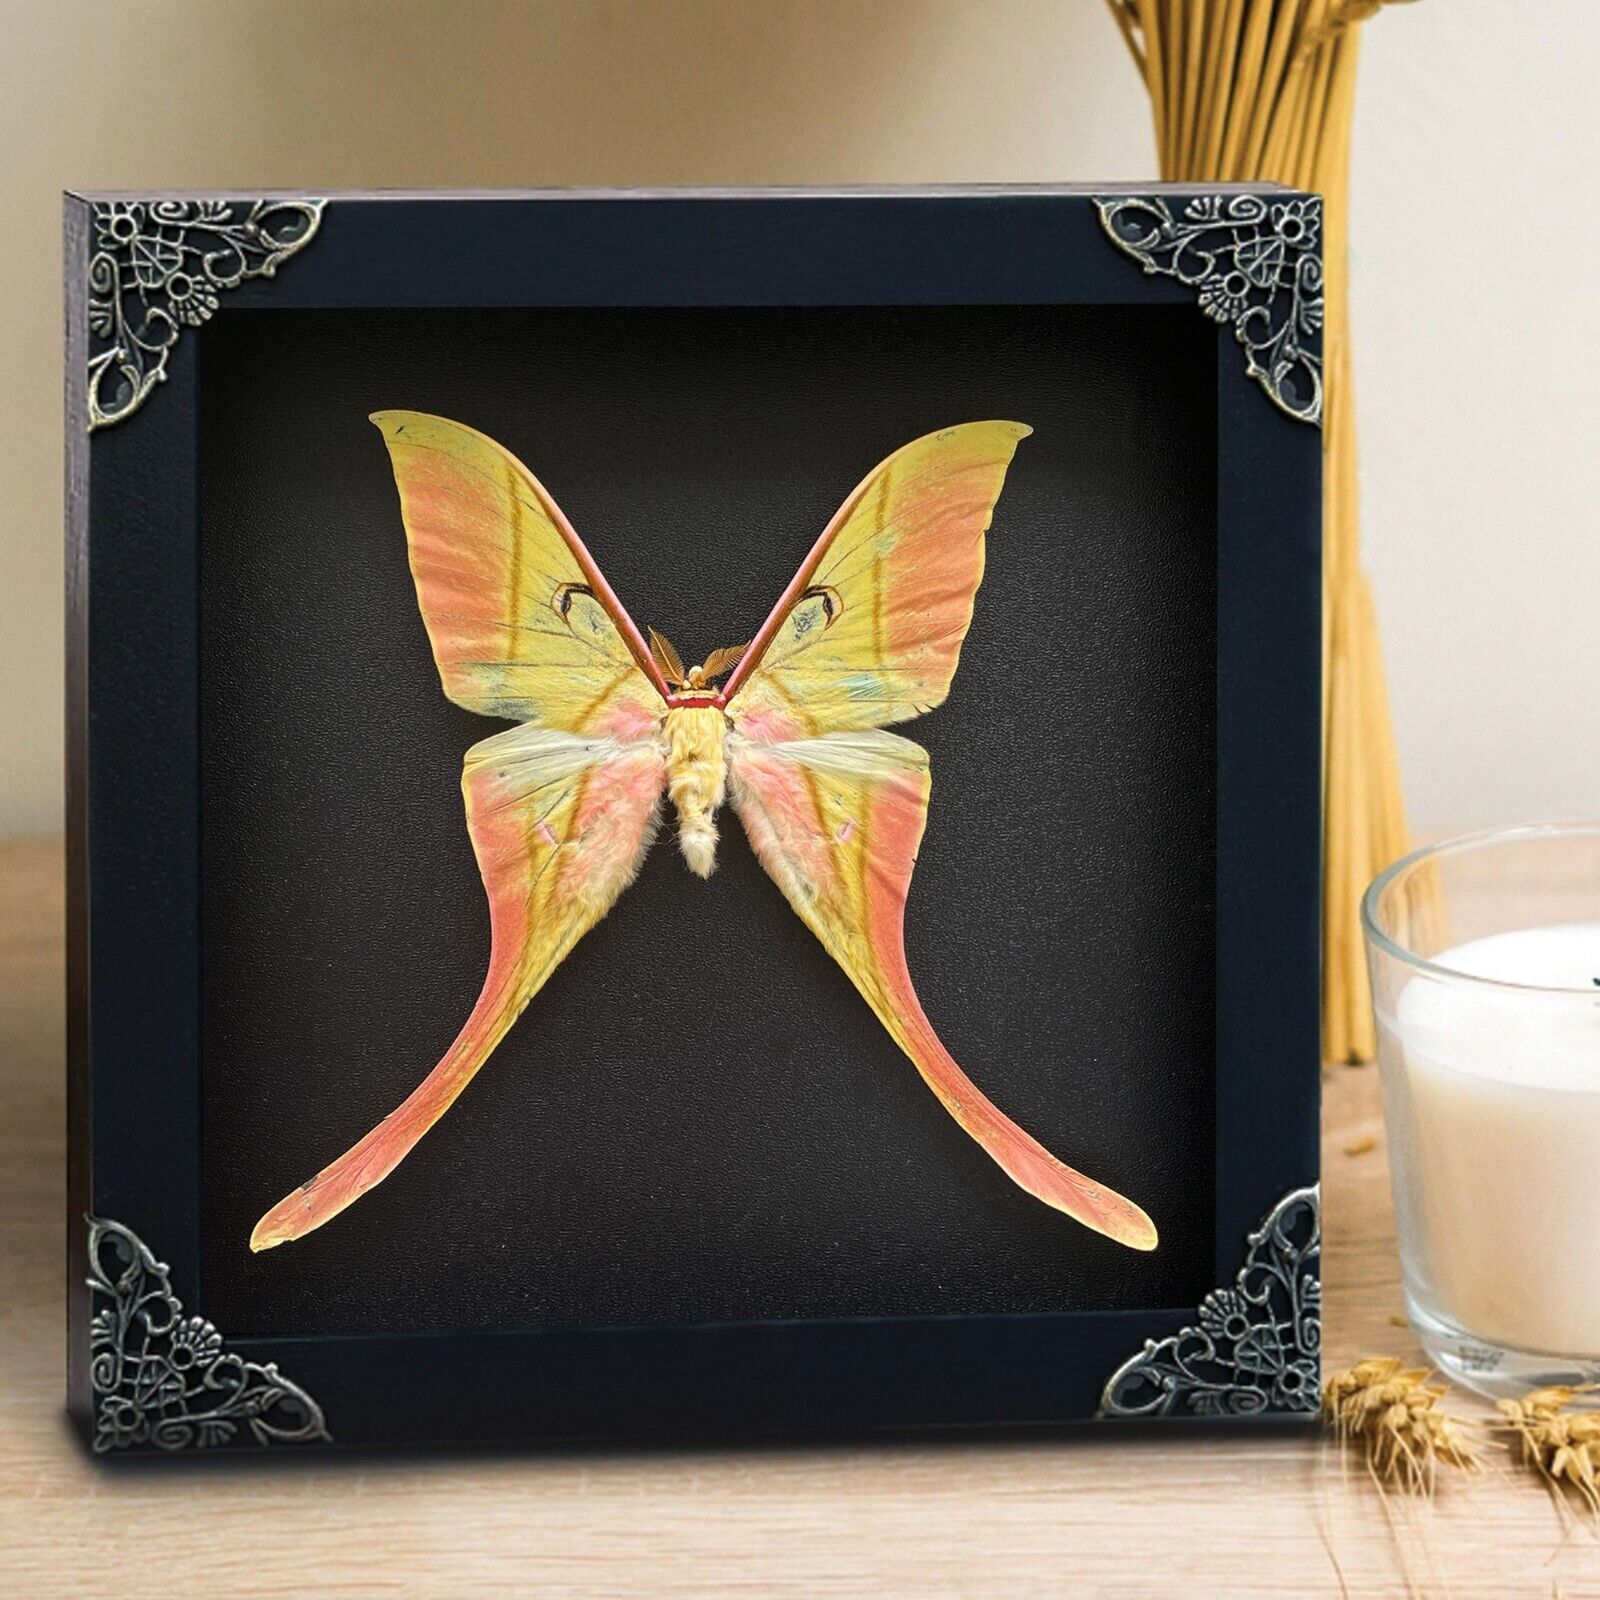 Real Moon Moth Framed Taxidermy Preserved Insect Shadow Box Decor Gift For Lover